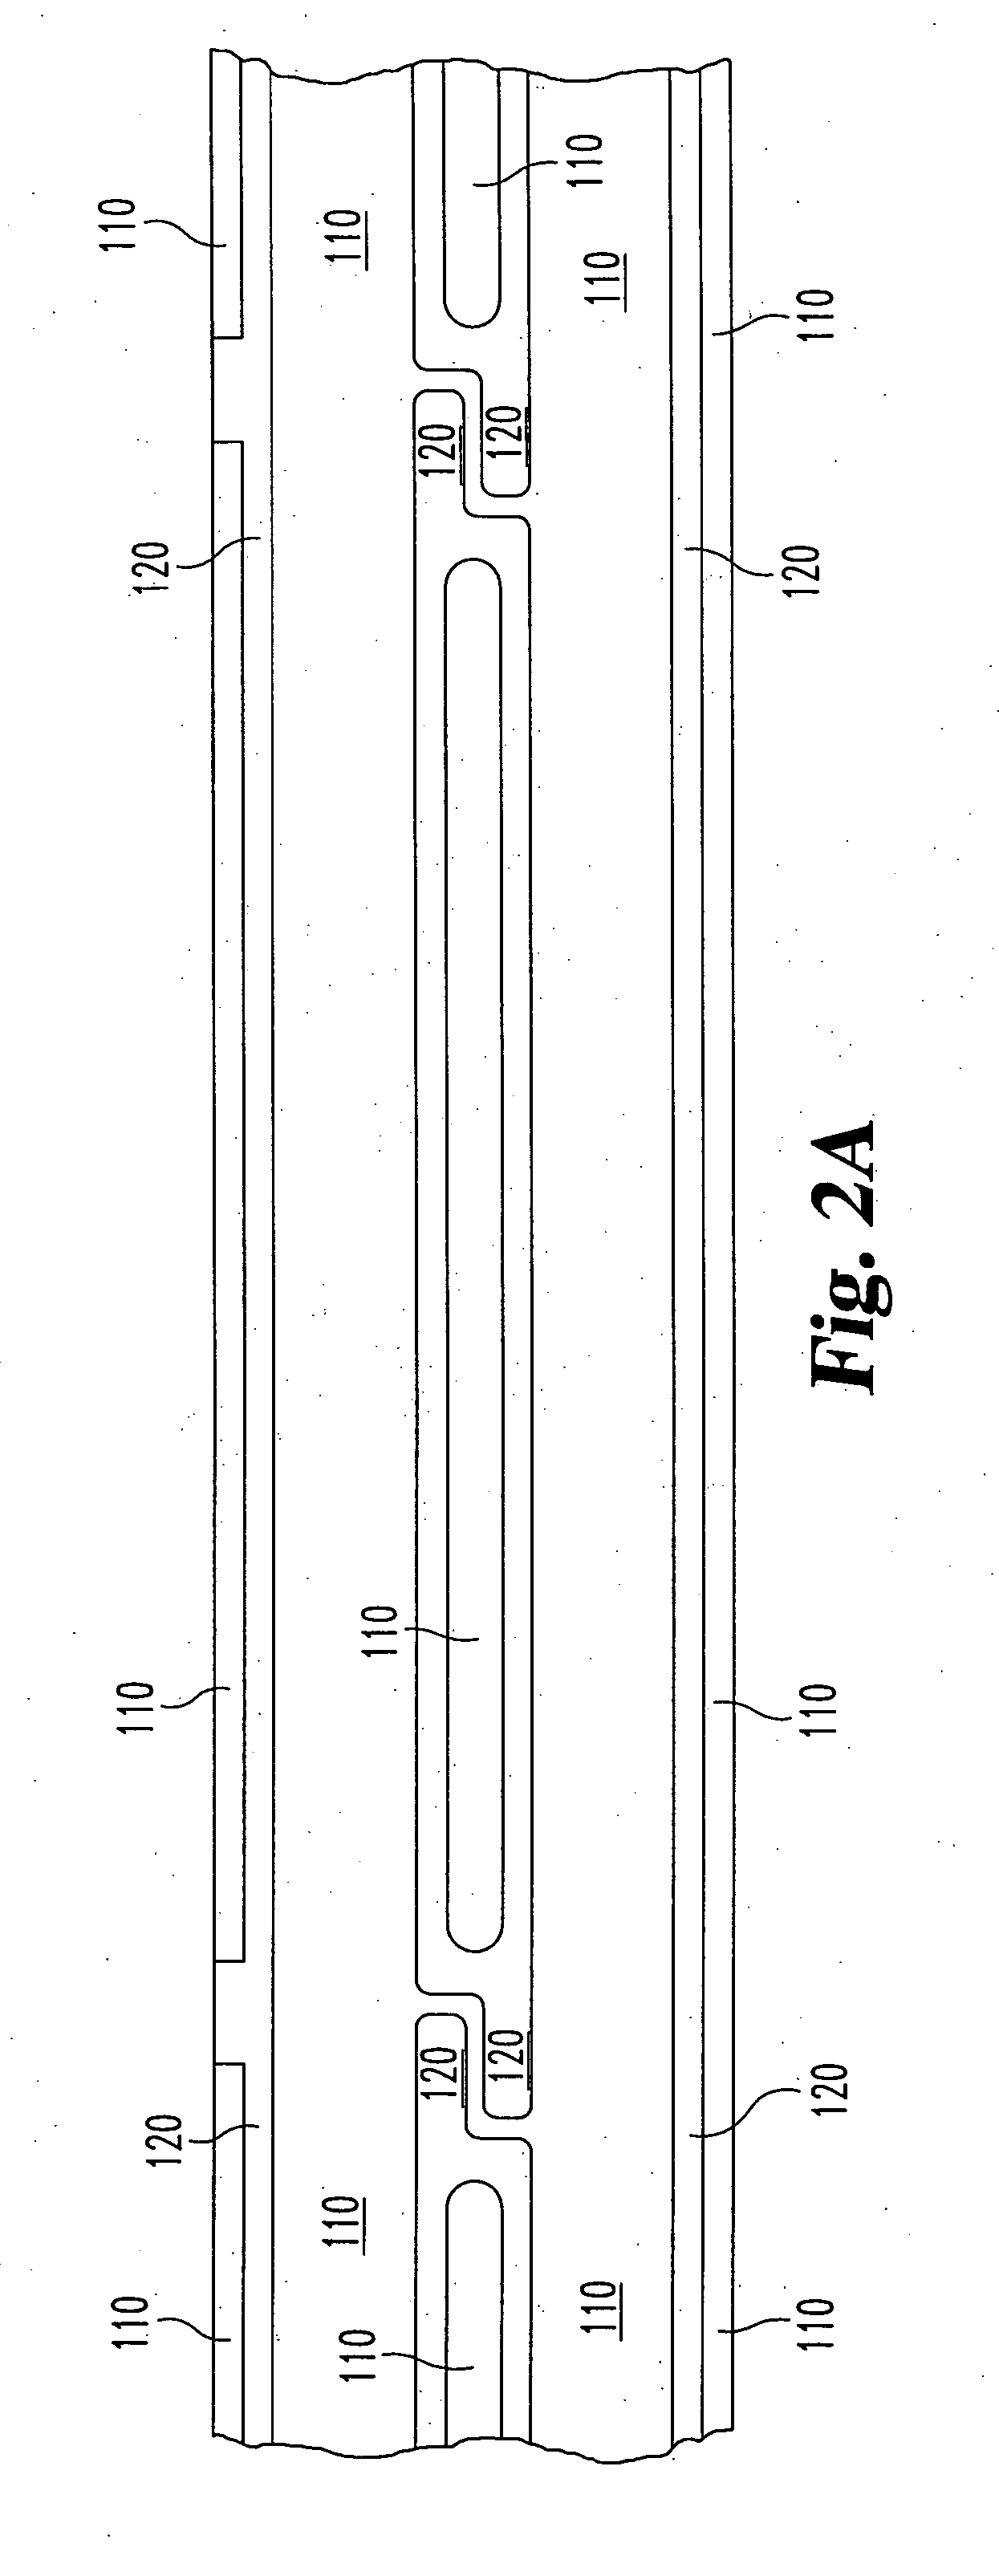 Method and apparatus for manufacturing thin film heaters